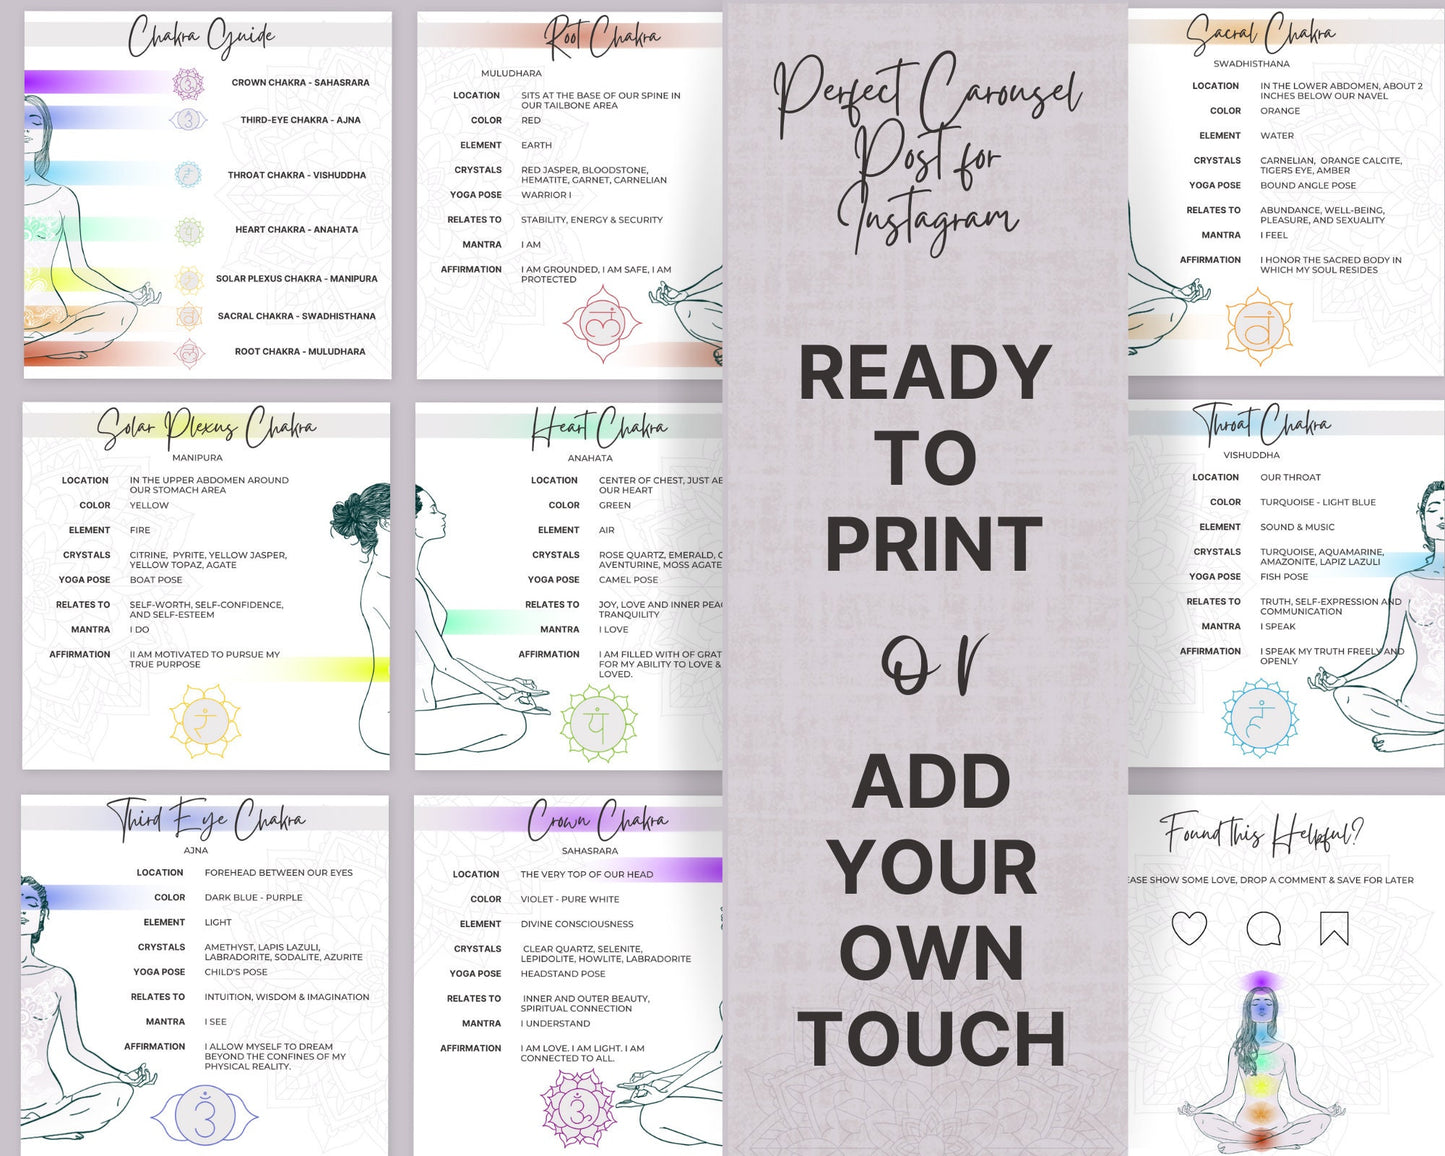 Chakra Meaning Cards, Printable Chakra Cards, Chakra Carousel Post, Chakra Cards, Chakra Information Cards, Chakra Card Template, Reiki